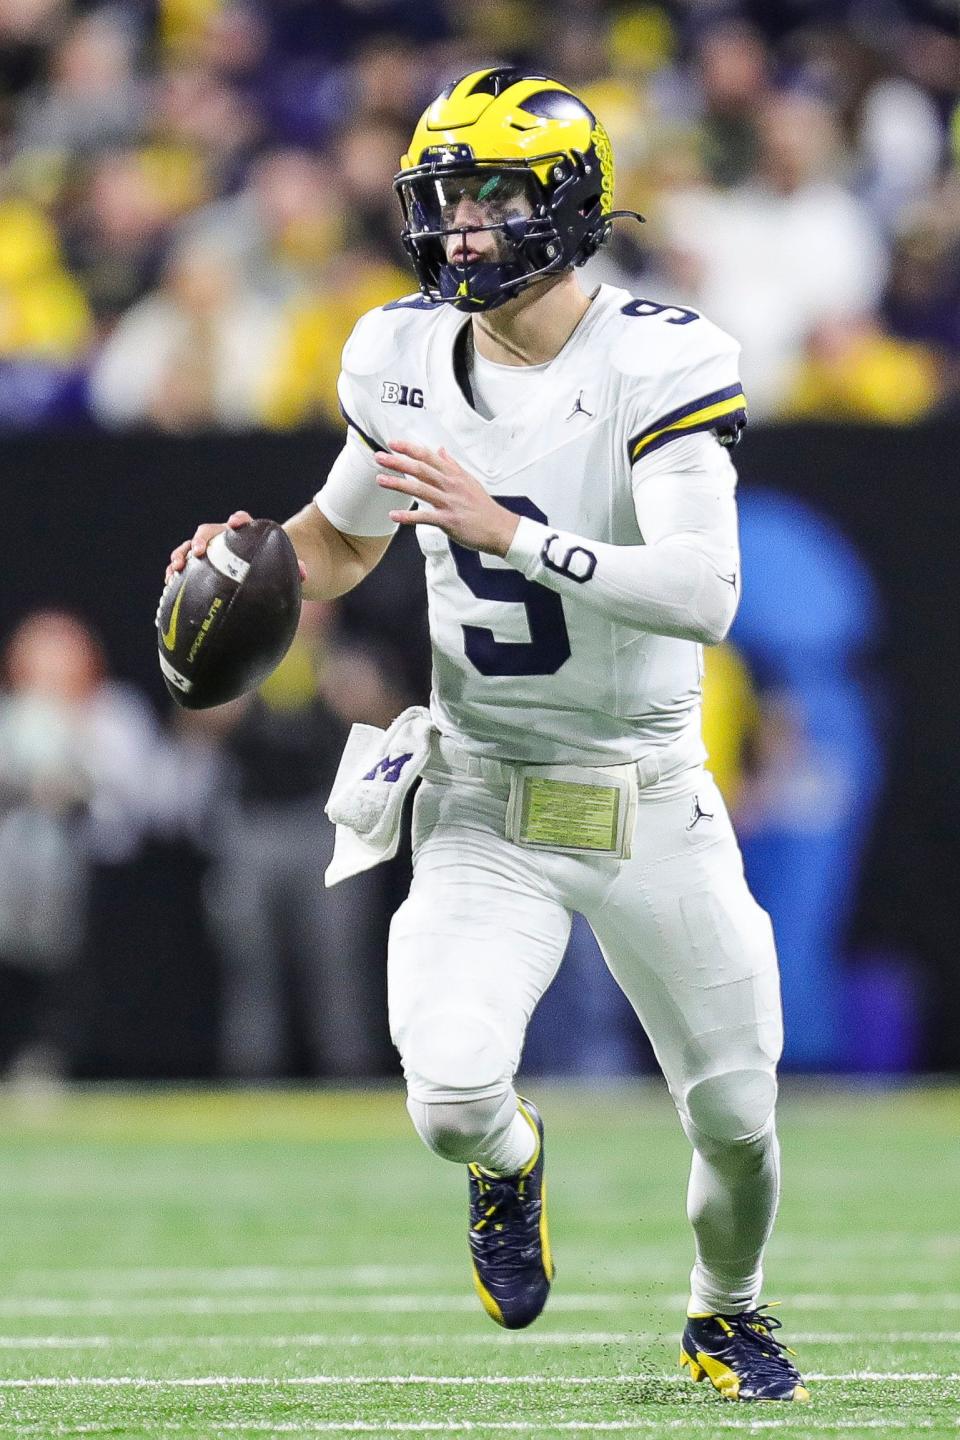 Michigan quarterback J.J. McCarthy looks to pass against Iowa during the second half of U-M's 26-0 win over Iowa in the Big Ten championship game in Indianapolis on Saturday, Dec. 2, 2023.